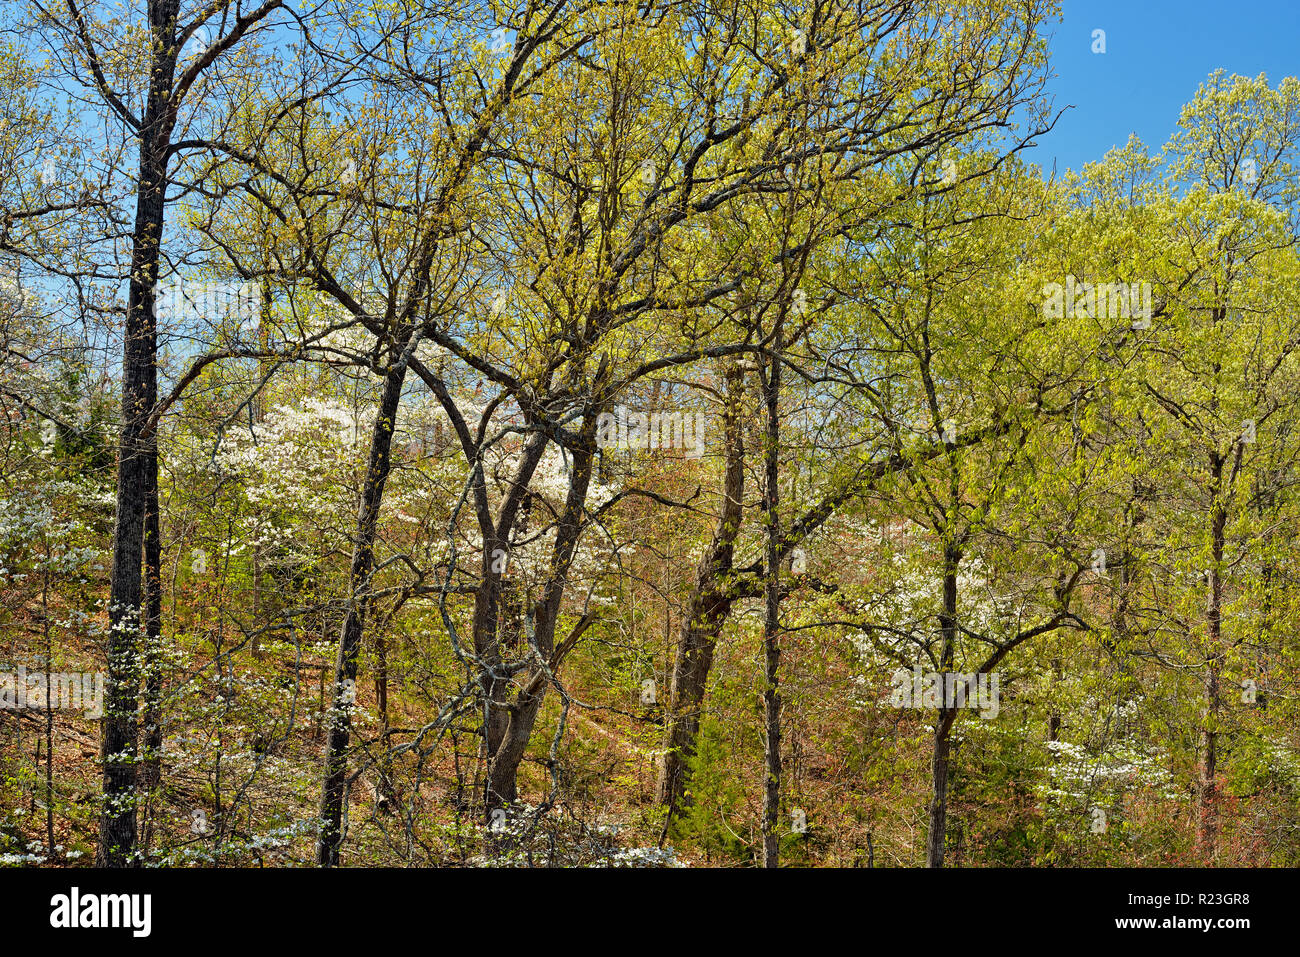 Spring foliage leafing out in deciduous trees, flowering dogwood, Ava, Missouri, USA Stock Photo